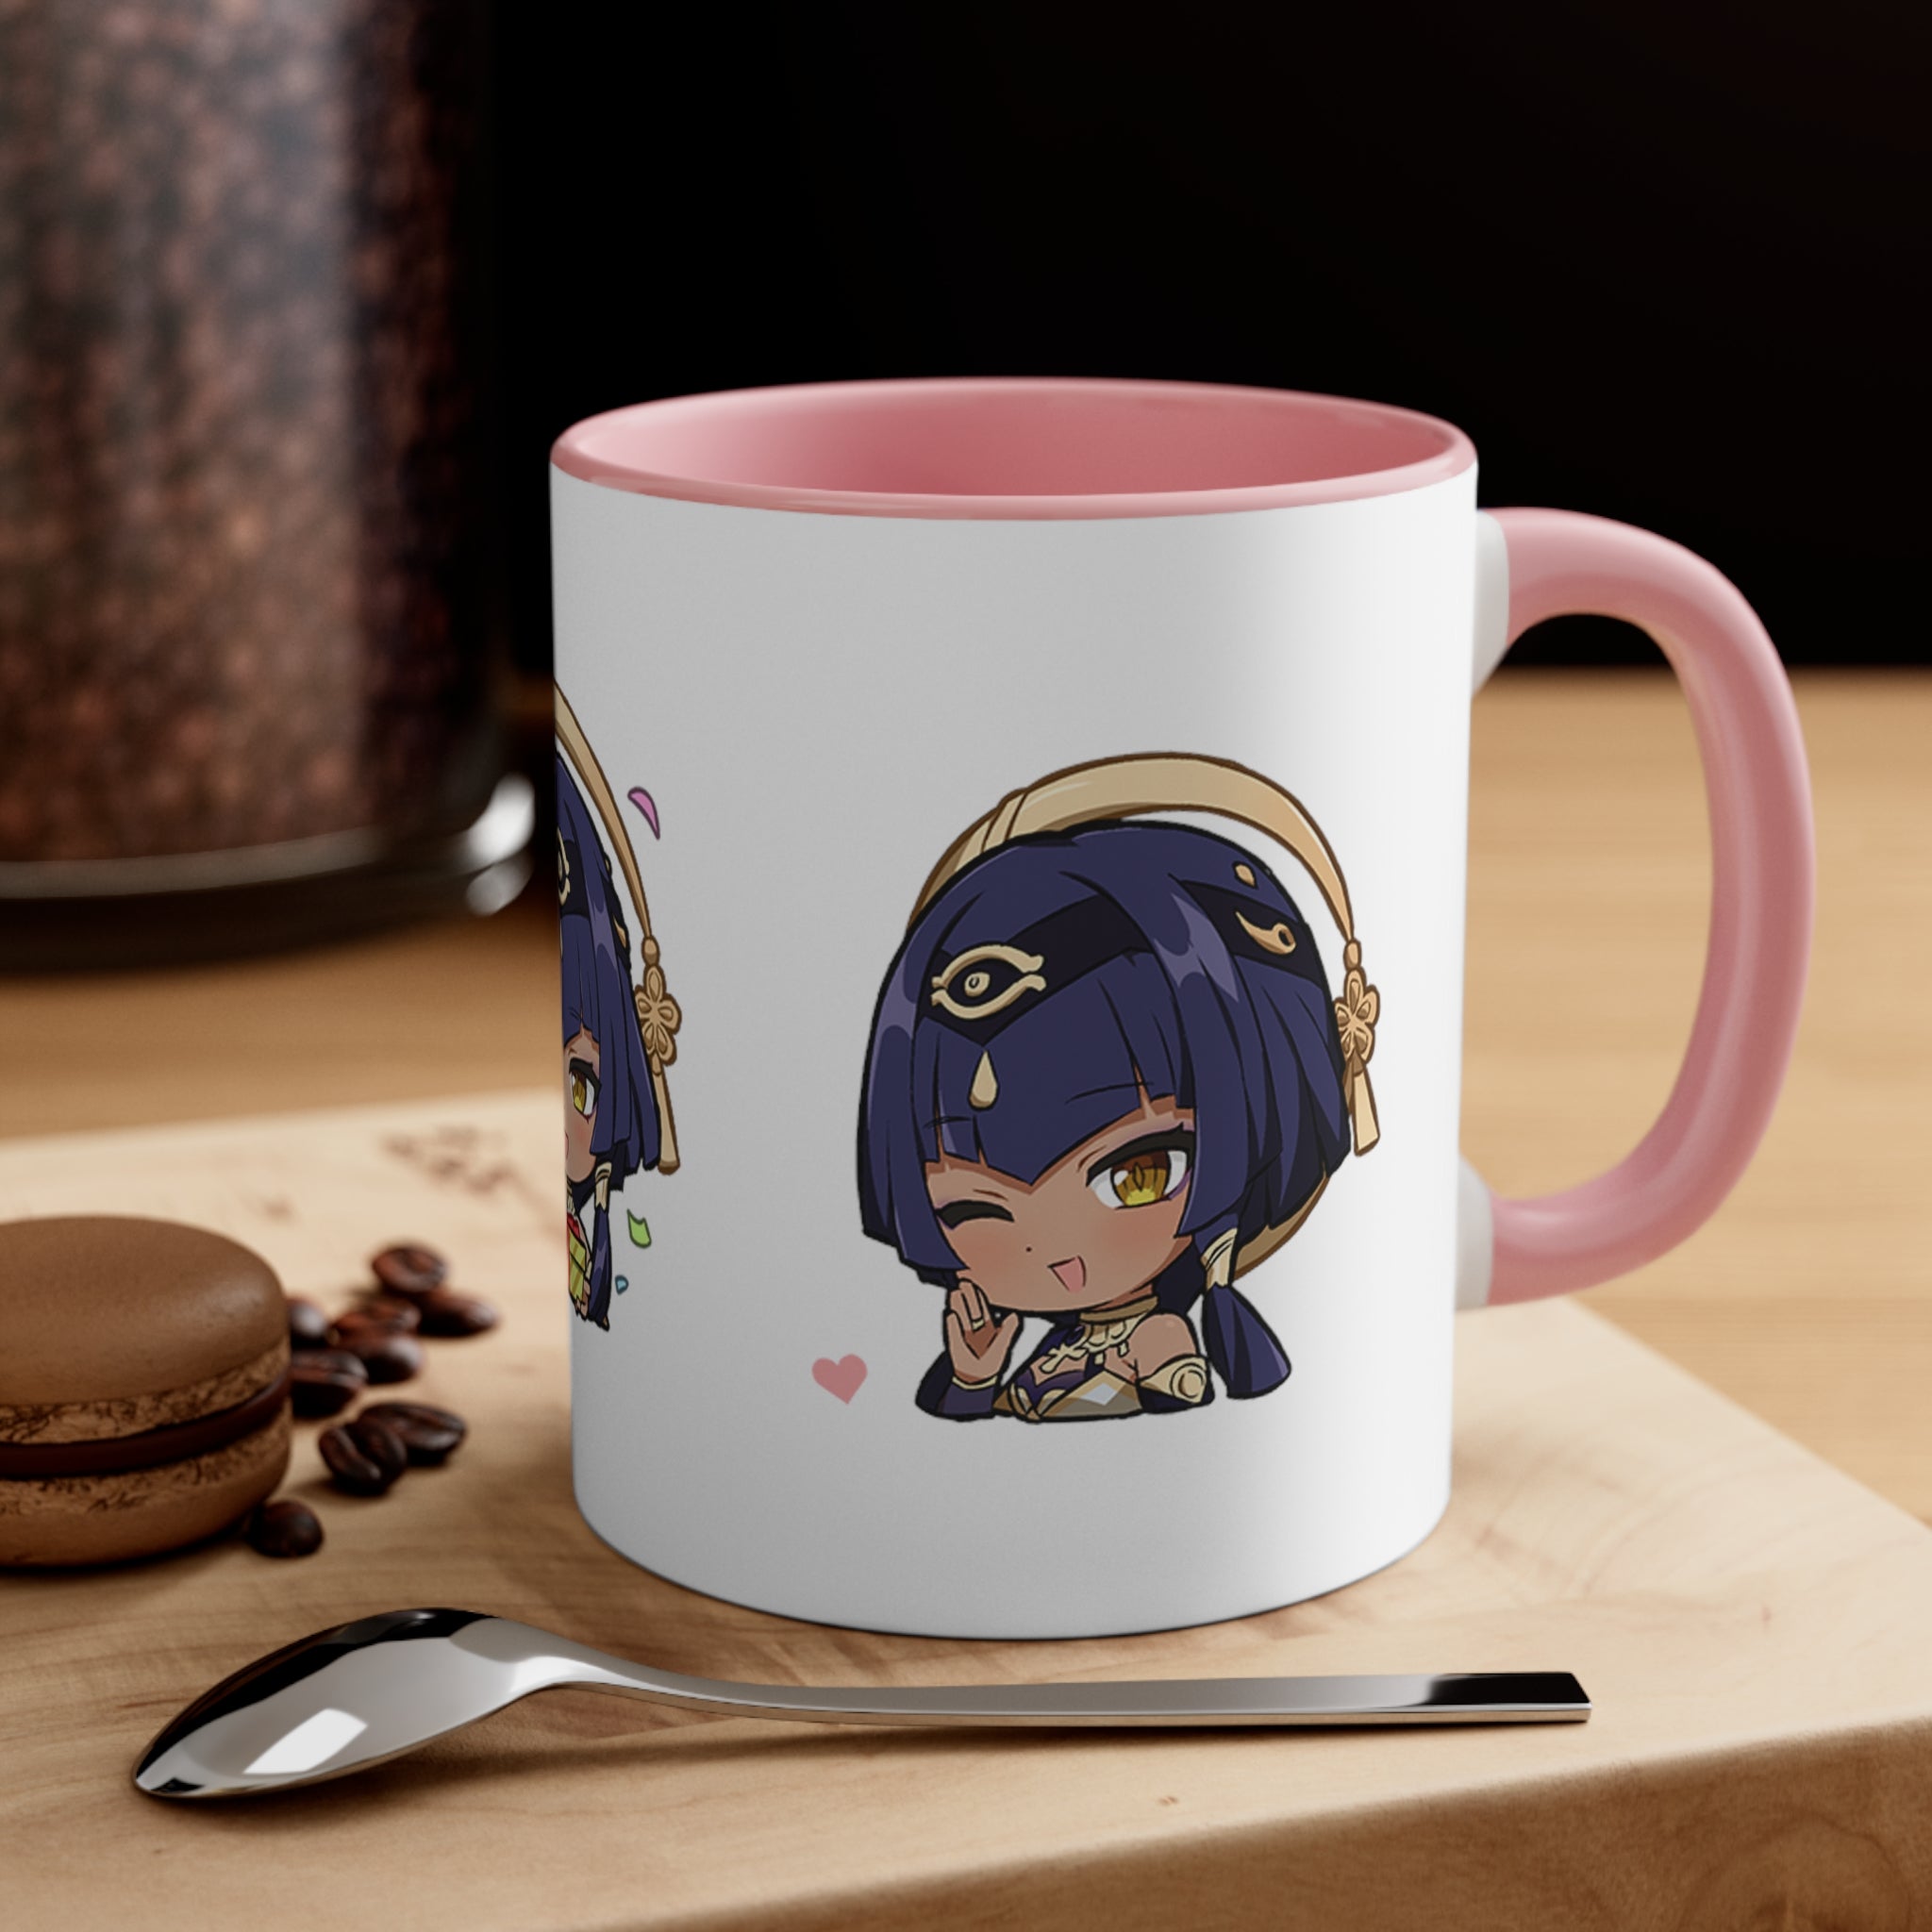 Candace Accent Coffee Mug, 11oz Cups Mugs Cup Gift For Gamer Gifts Game Anime Fanart Fan Birthday Valentine's Christmas